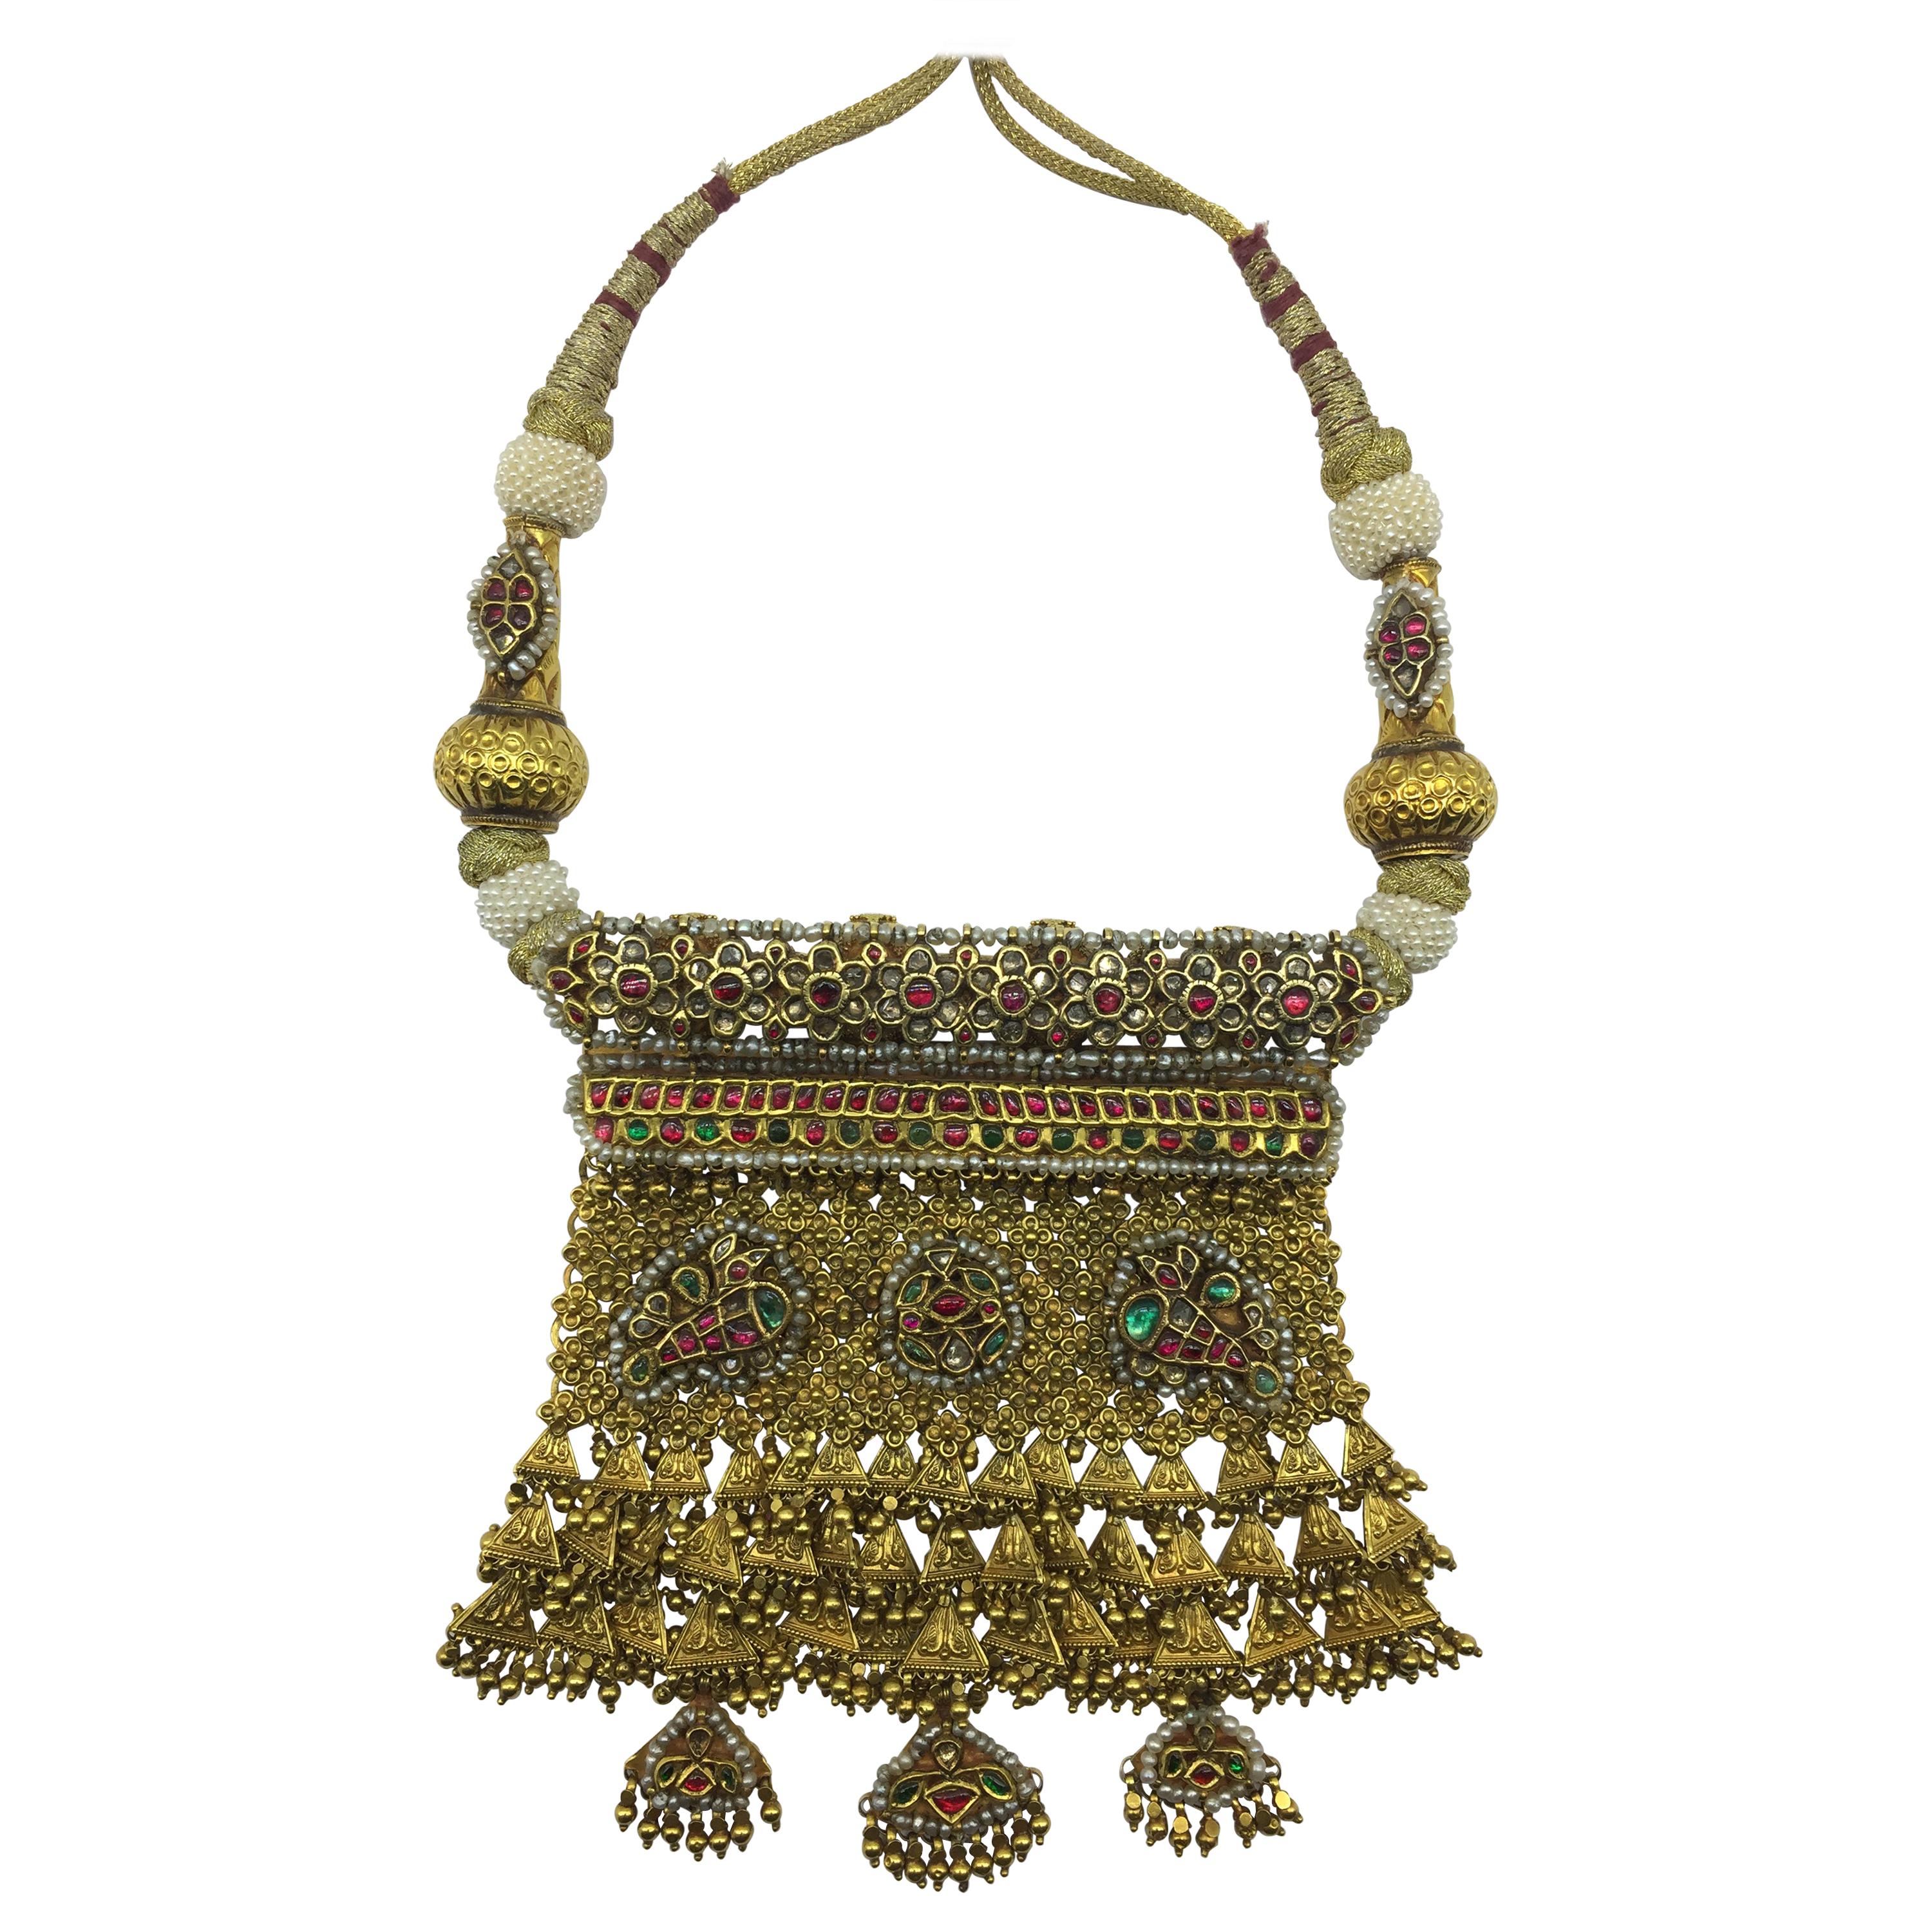 Why does Indian gold jewelry tend to be more yellow?